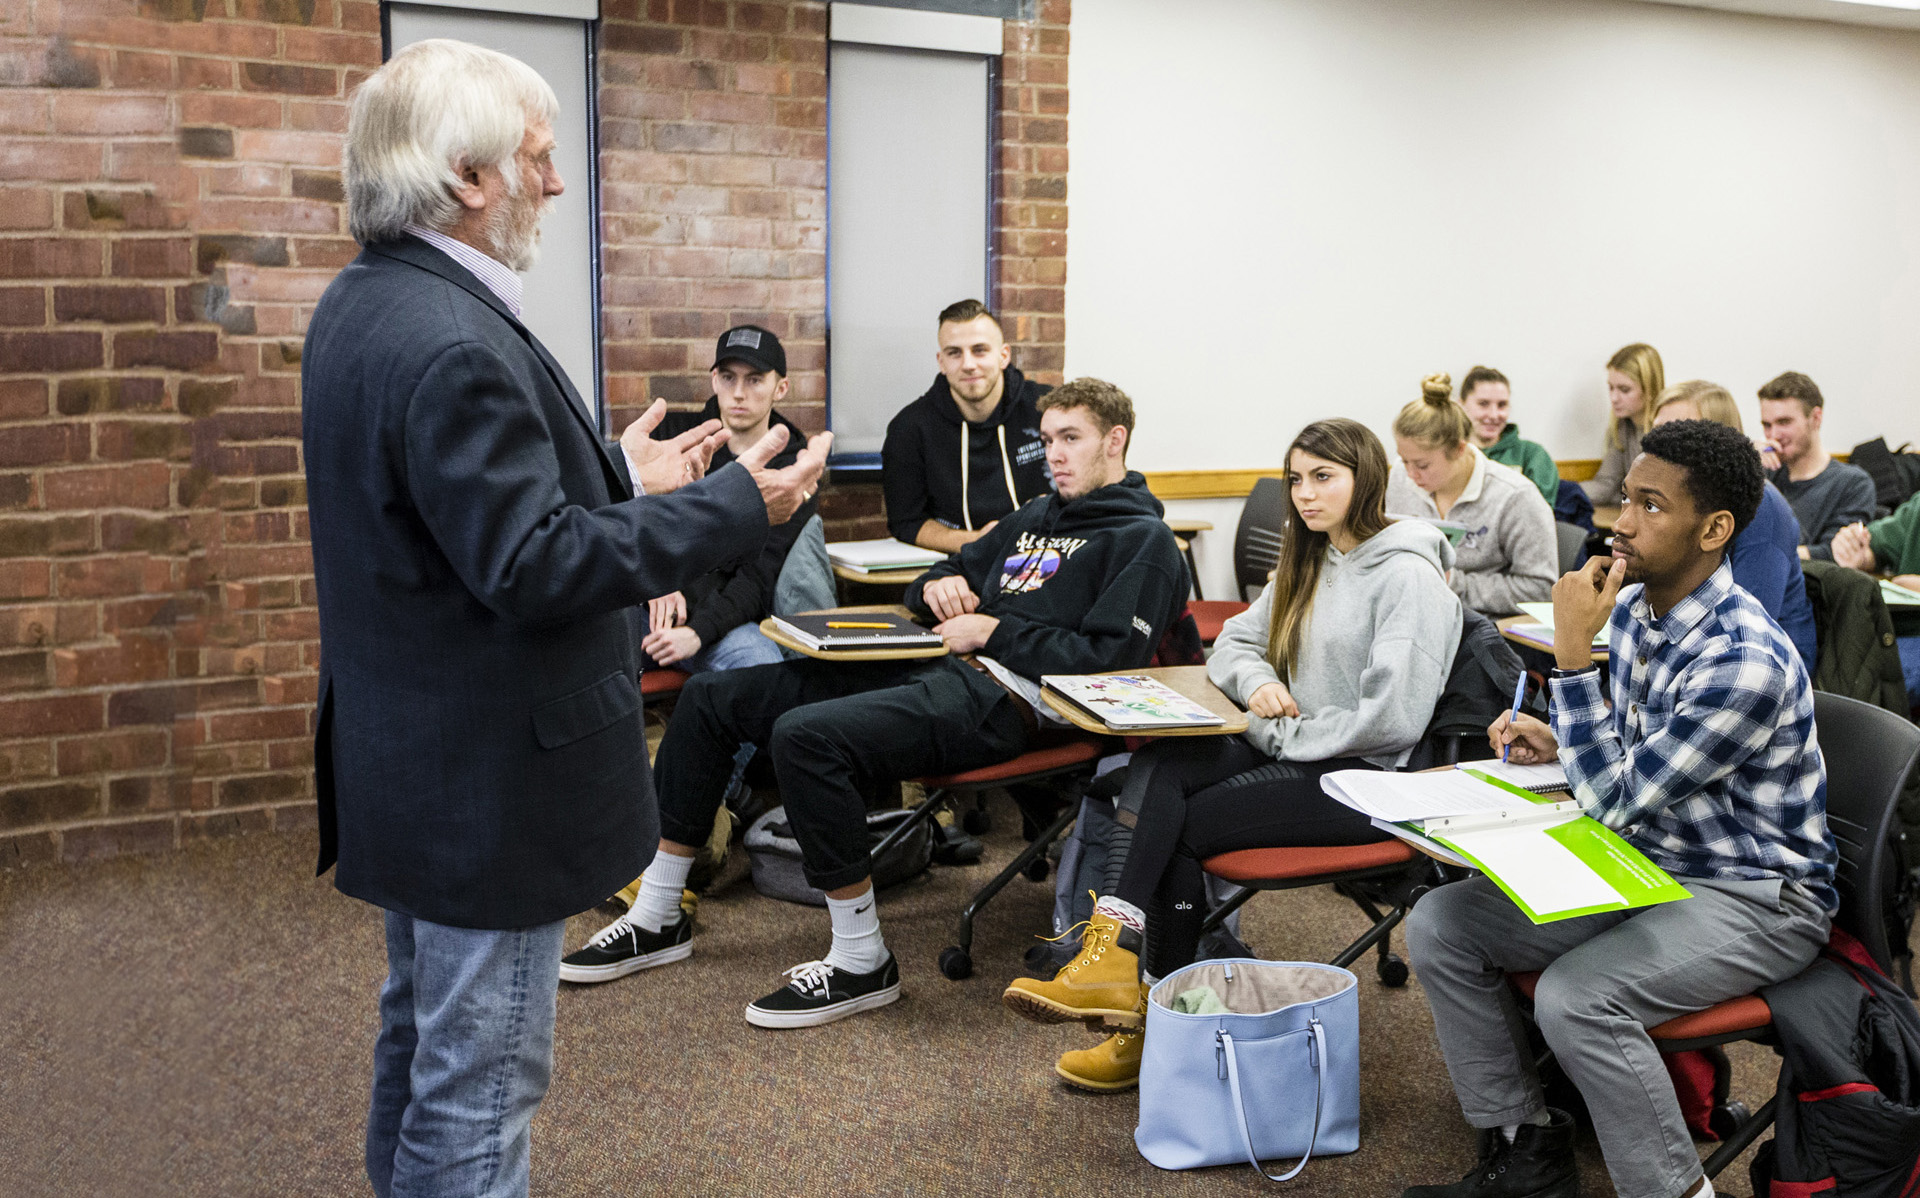 Jeff Segrave, Skidmore professor, talks to students about the Super Bowl